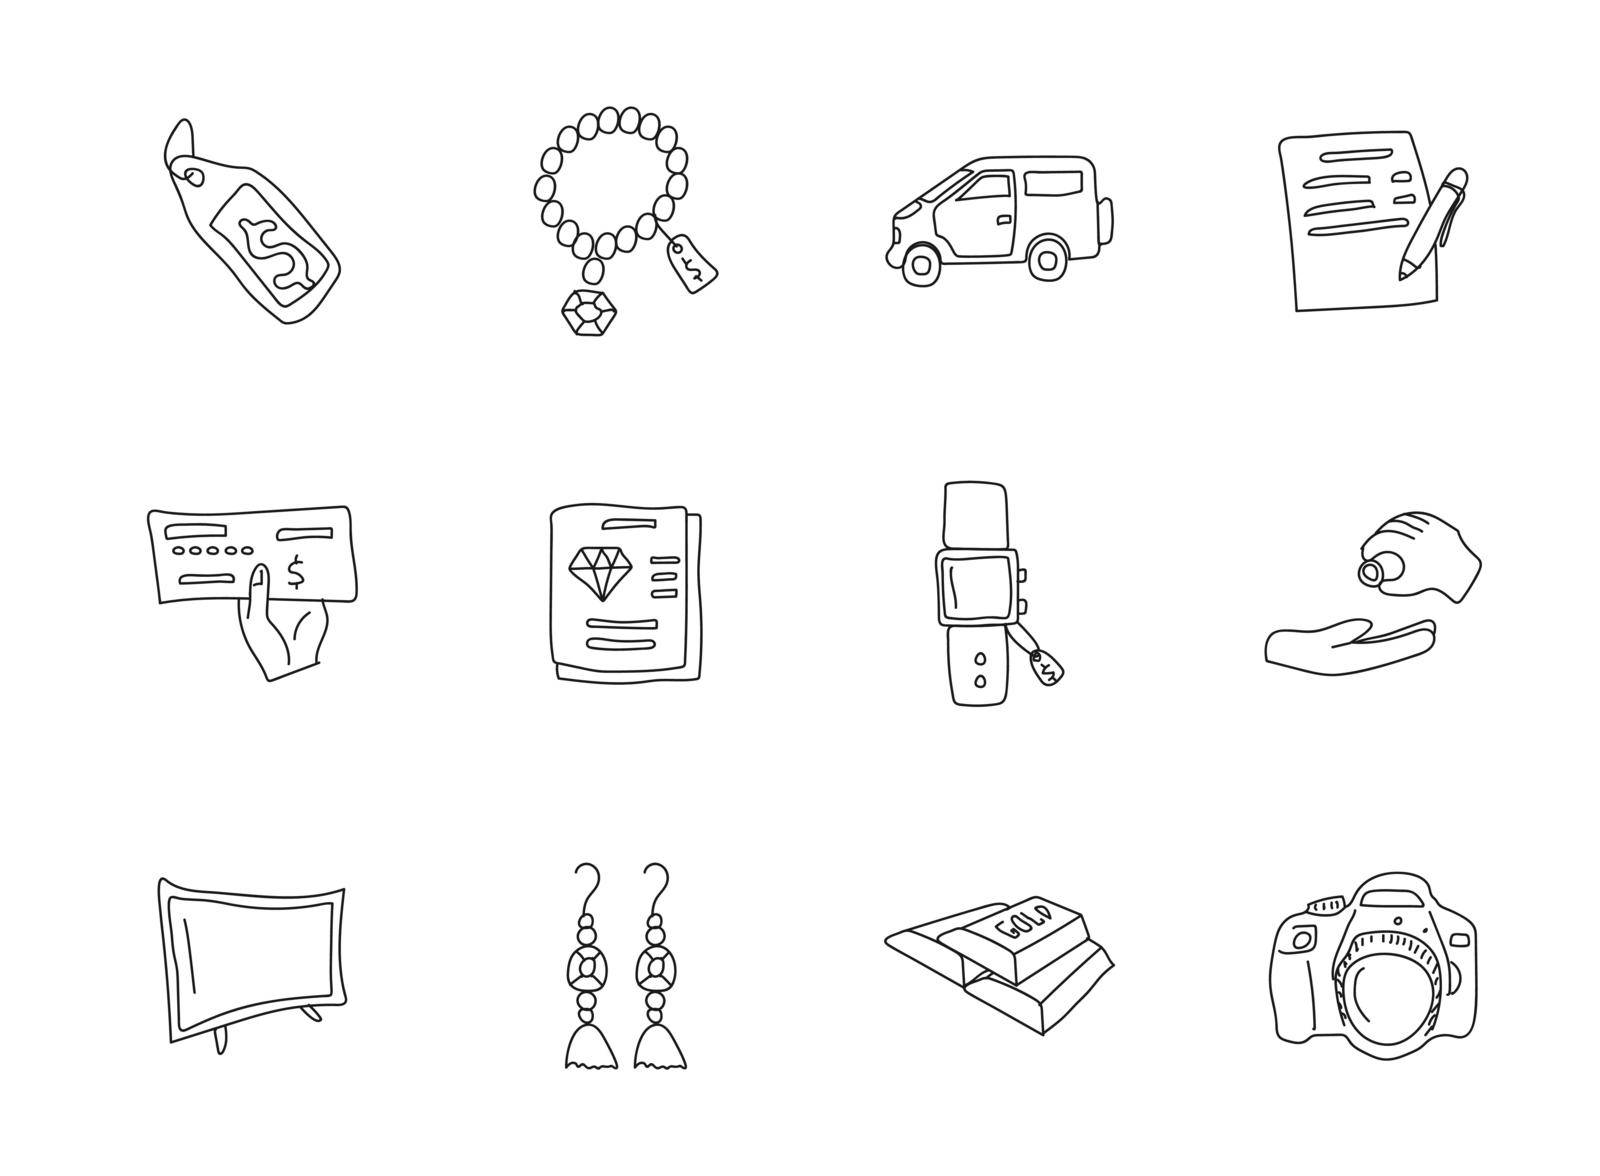 pawnshop doodles isolated on white. pawnshop icon set for web design, user interface, mobile apps and print